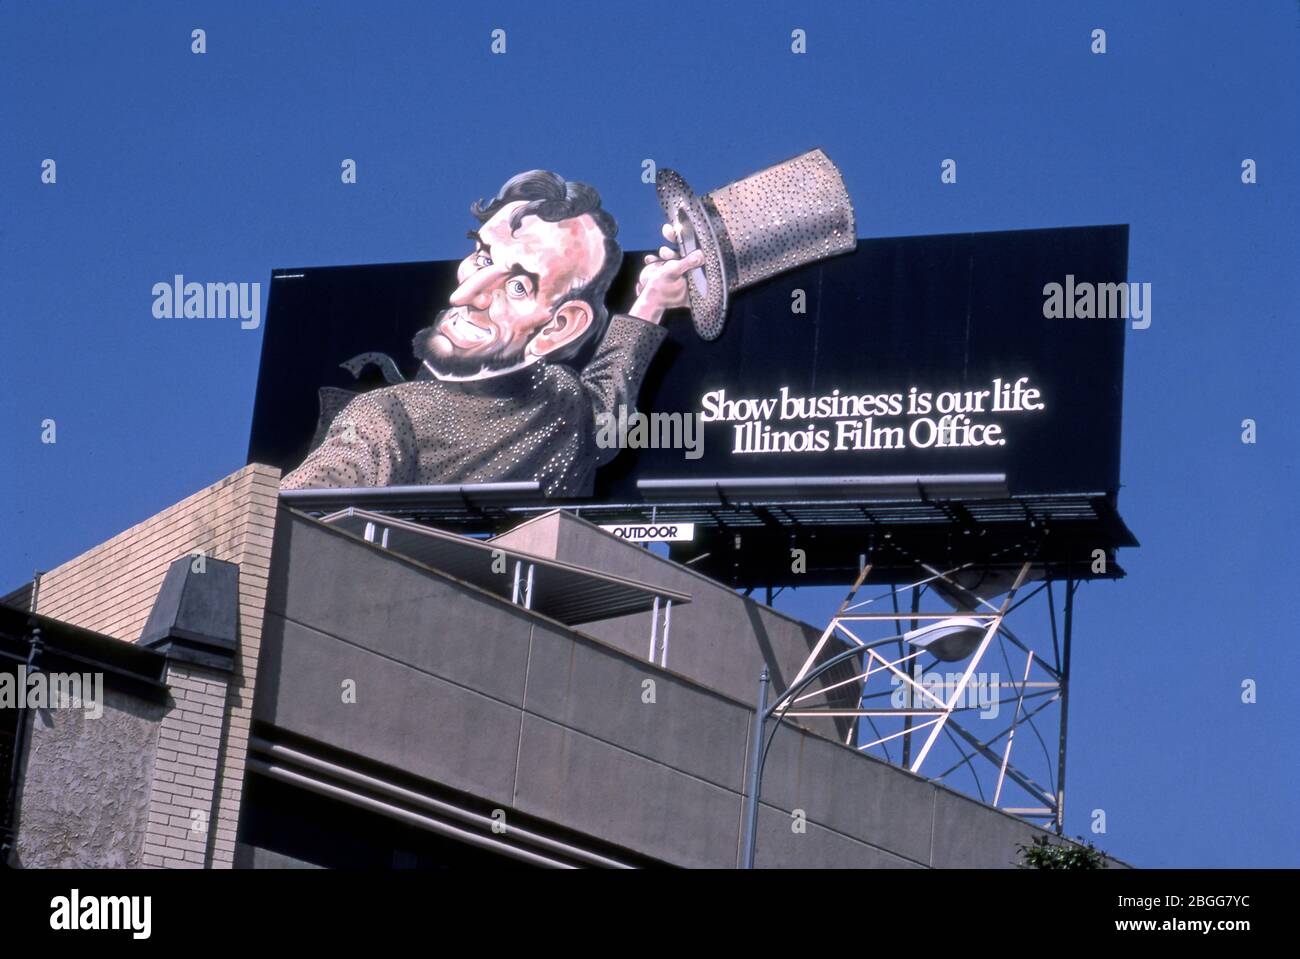 Billboard featuring Abe Lincoln in Los Angeles, CA promoting show business opportunities in Illinois. Stock Photo